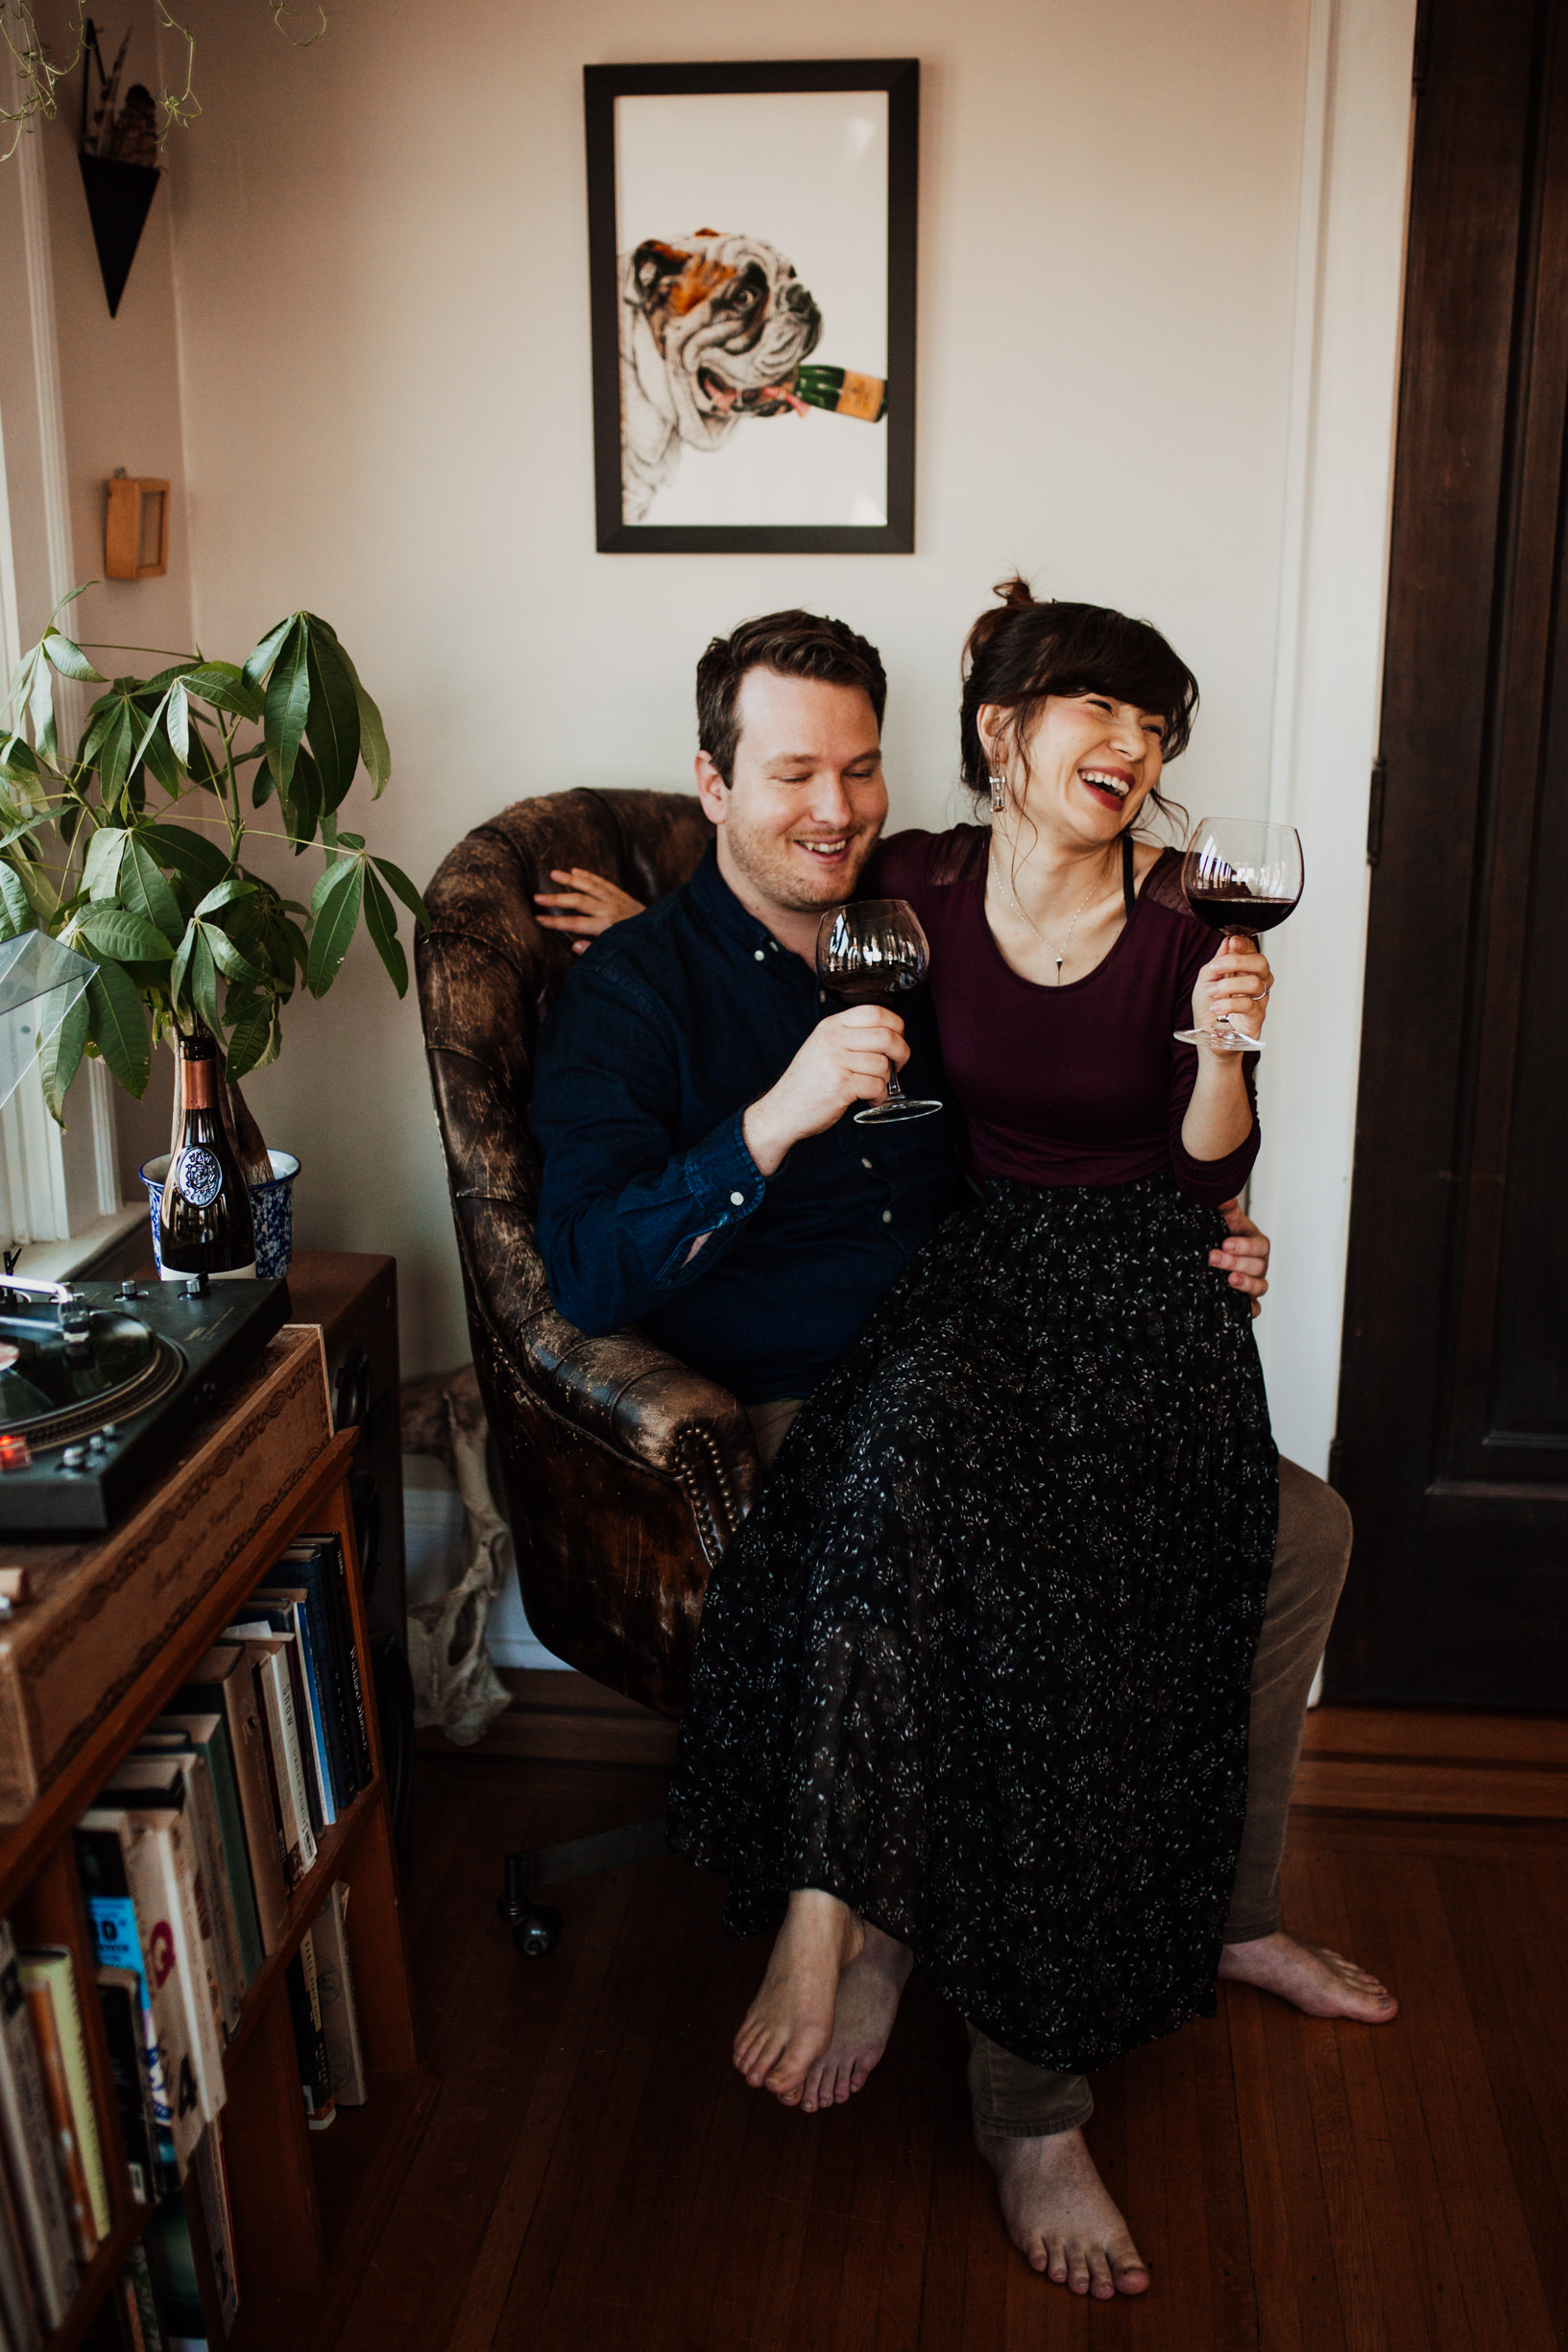 louisville-engagement-photographer-record-store-in-home-session-crystal-ludwick-photo (16 of 53).jpg